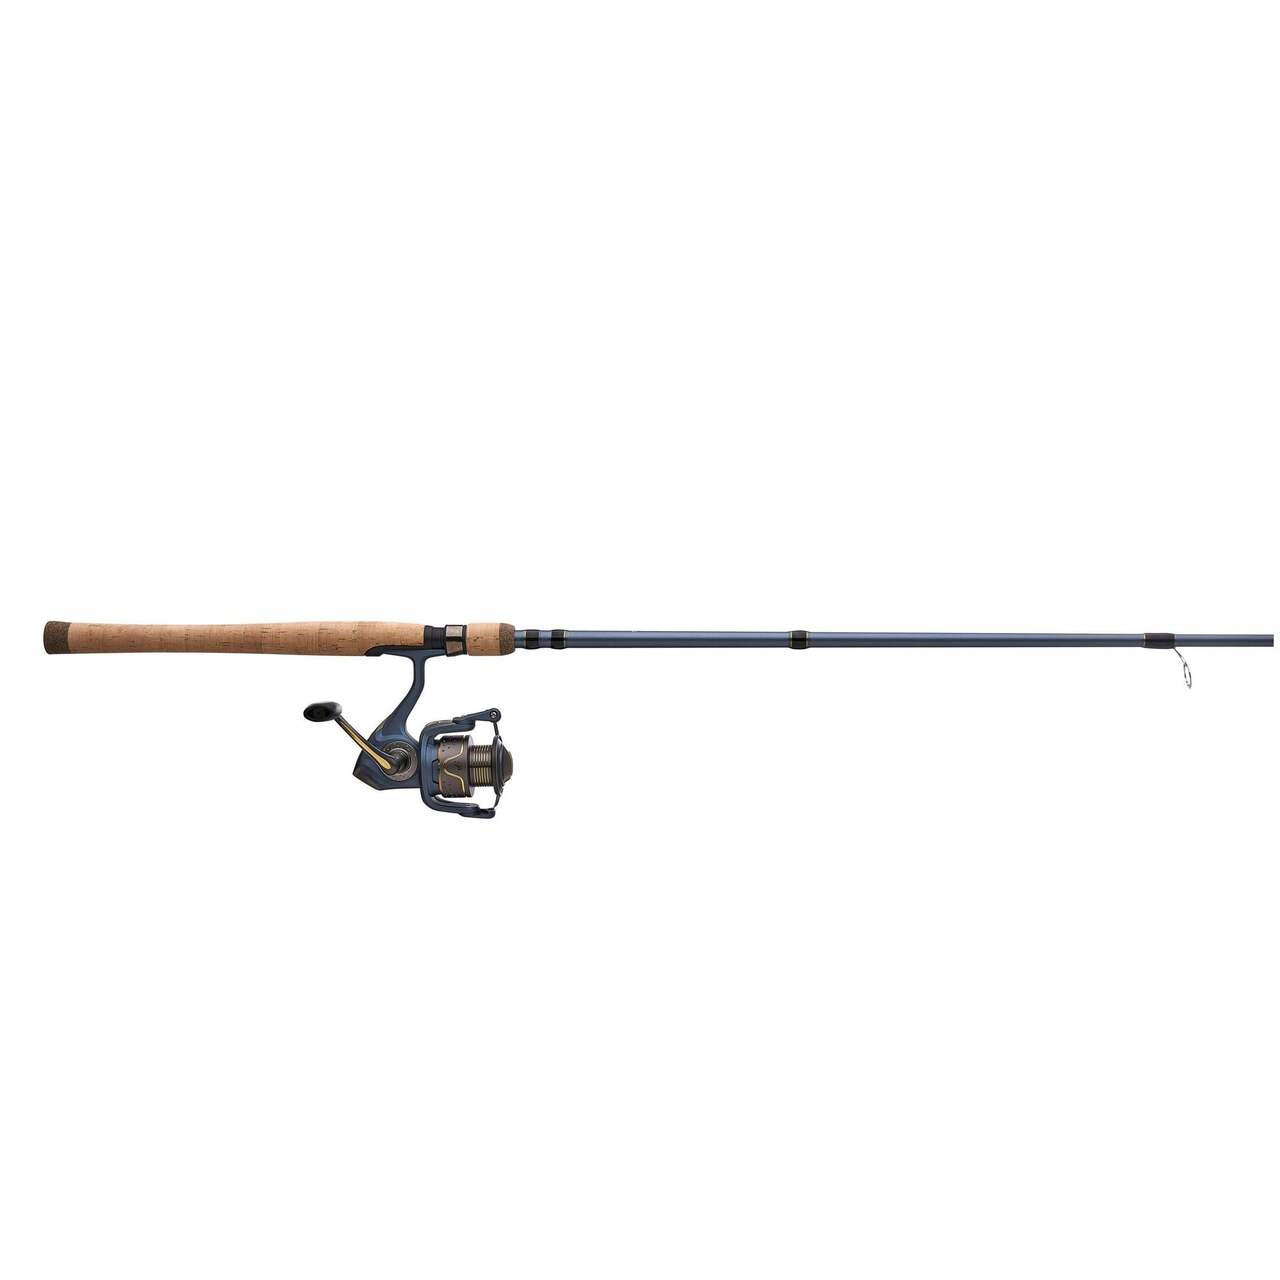 https://media-www.canadiantire.ca/product/playing/fishing/fishing-equipment/1786093/-pf-pres-35-cmb-7--33390475-5664-49e2-9cc0-26f66db88094-jpgrendition.jpg?imdensity=1&imwidth=640&impolicy=mZoom